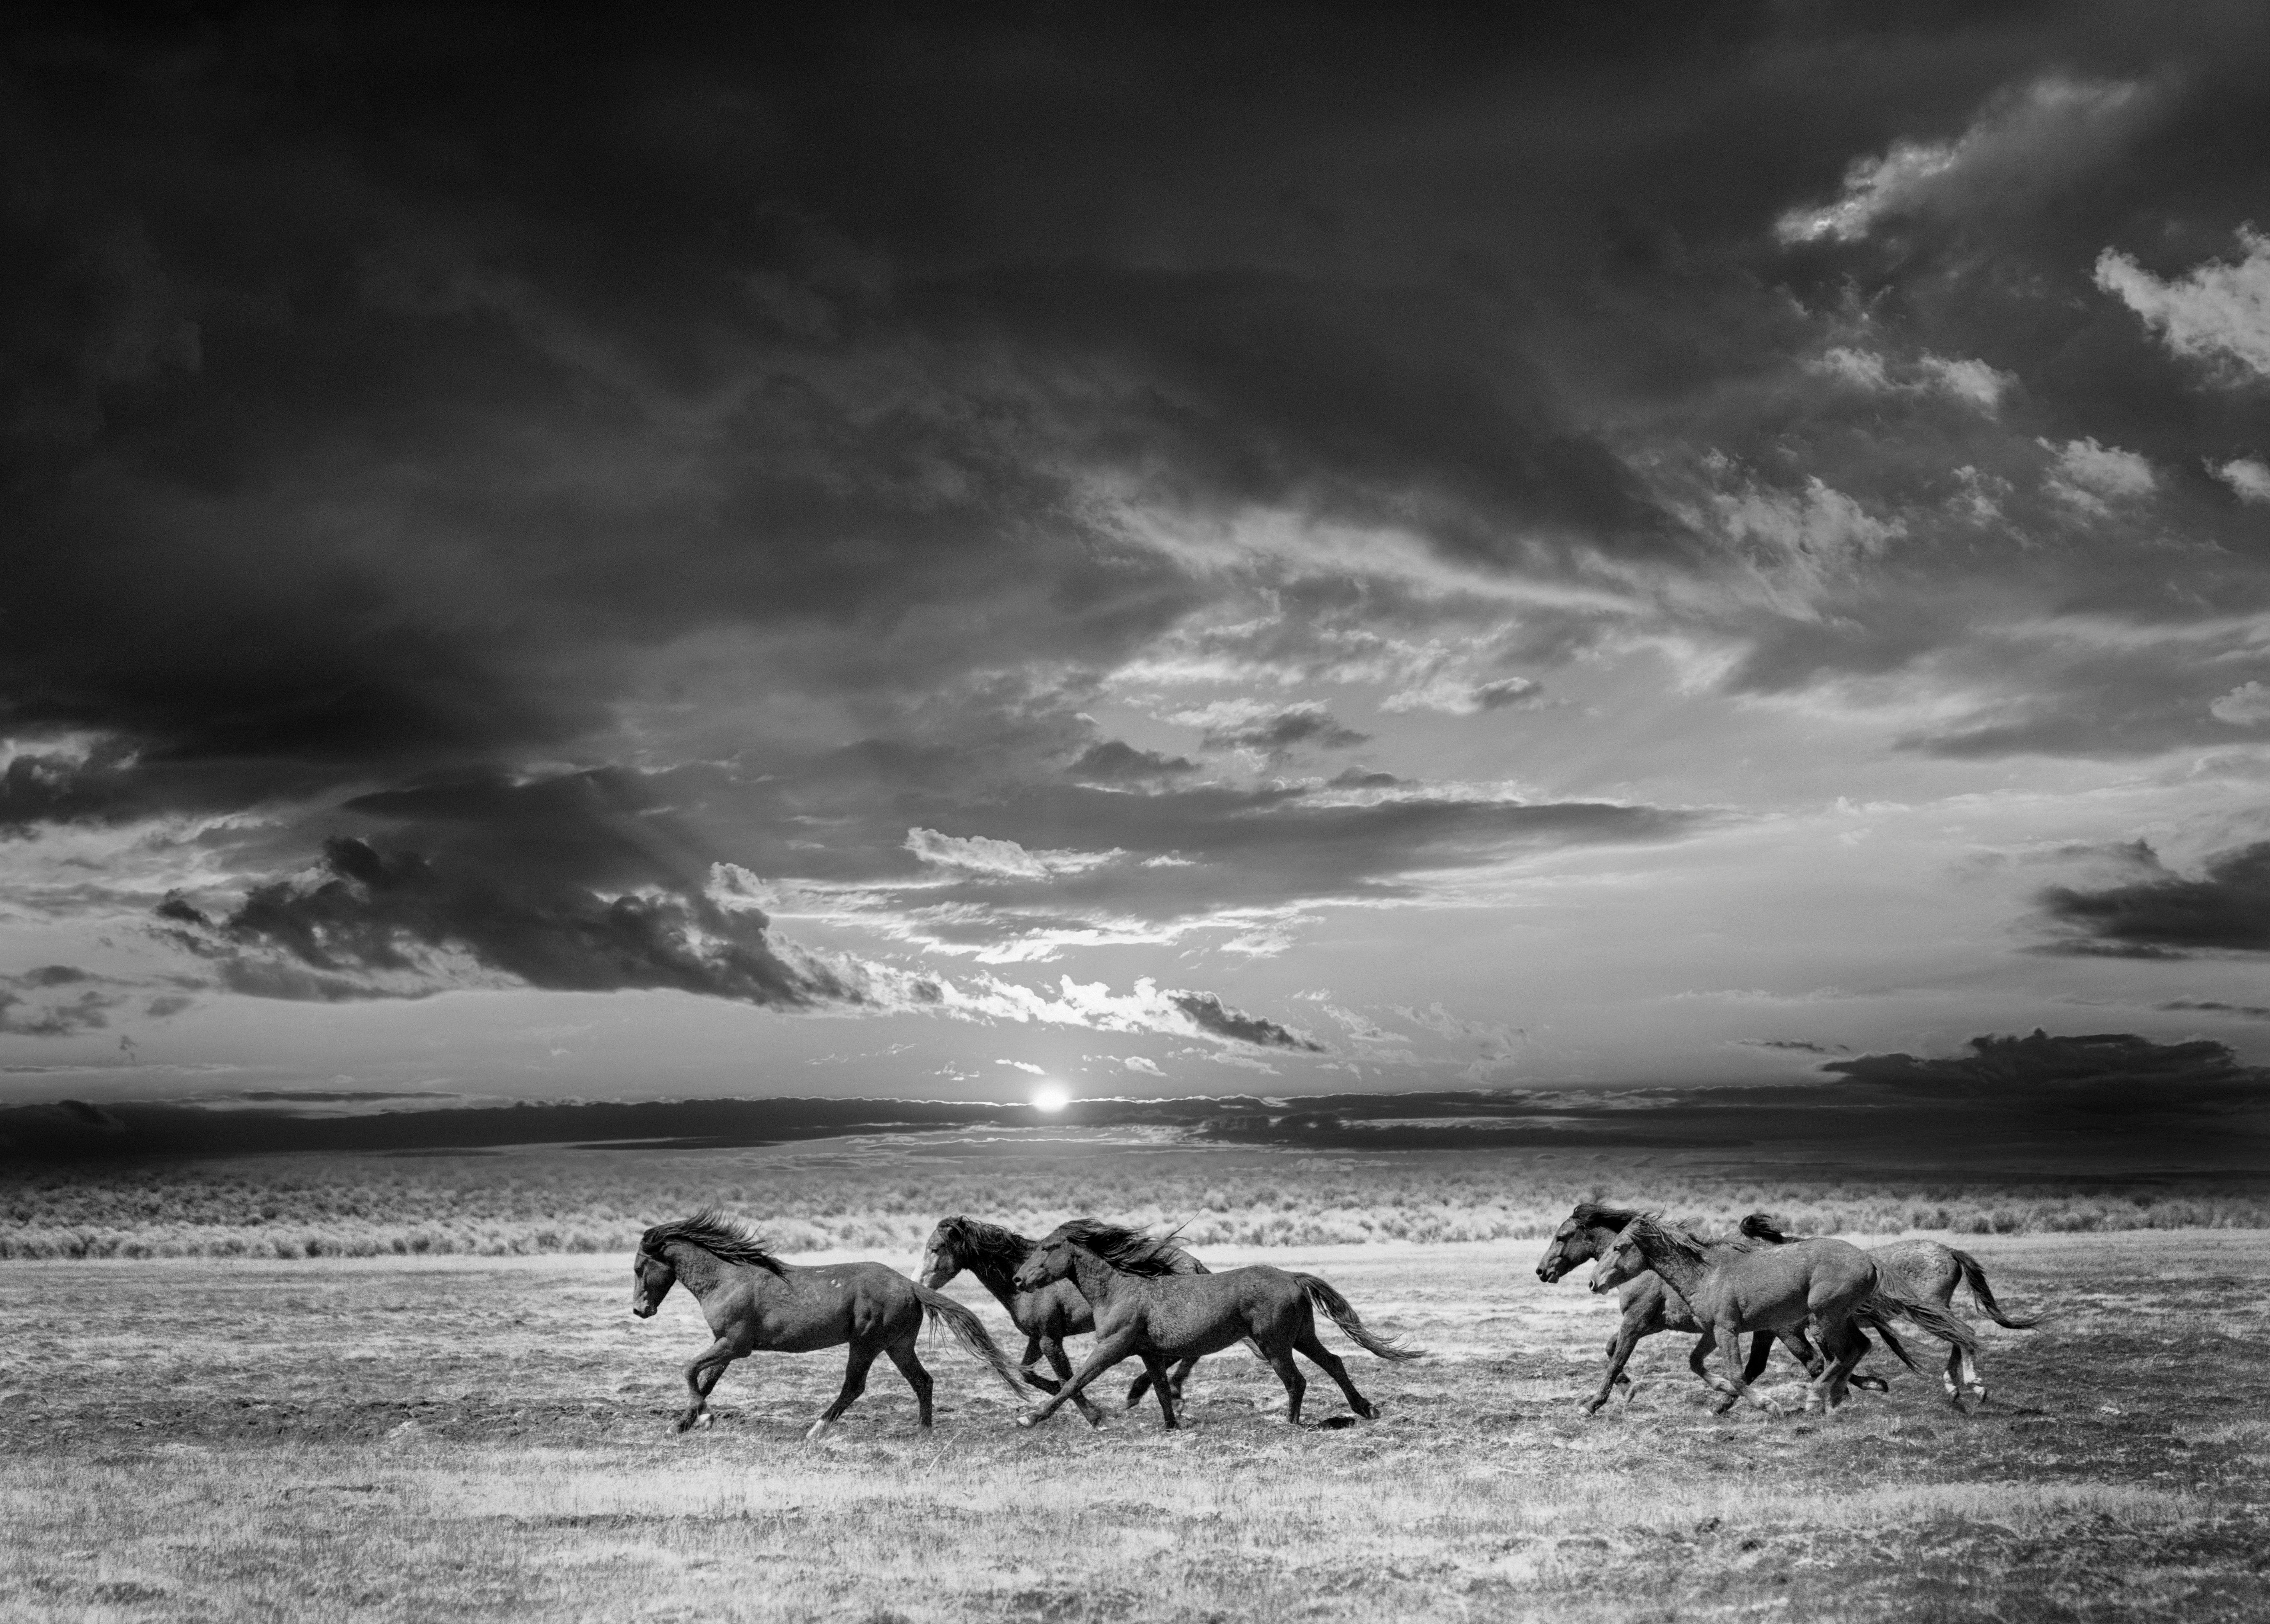 Shane Russeck Black and White Photograph - "Chasing the Light"  30x40 Black and White Wild Horses Photography Mustangs, Art